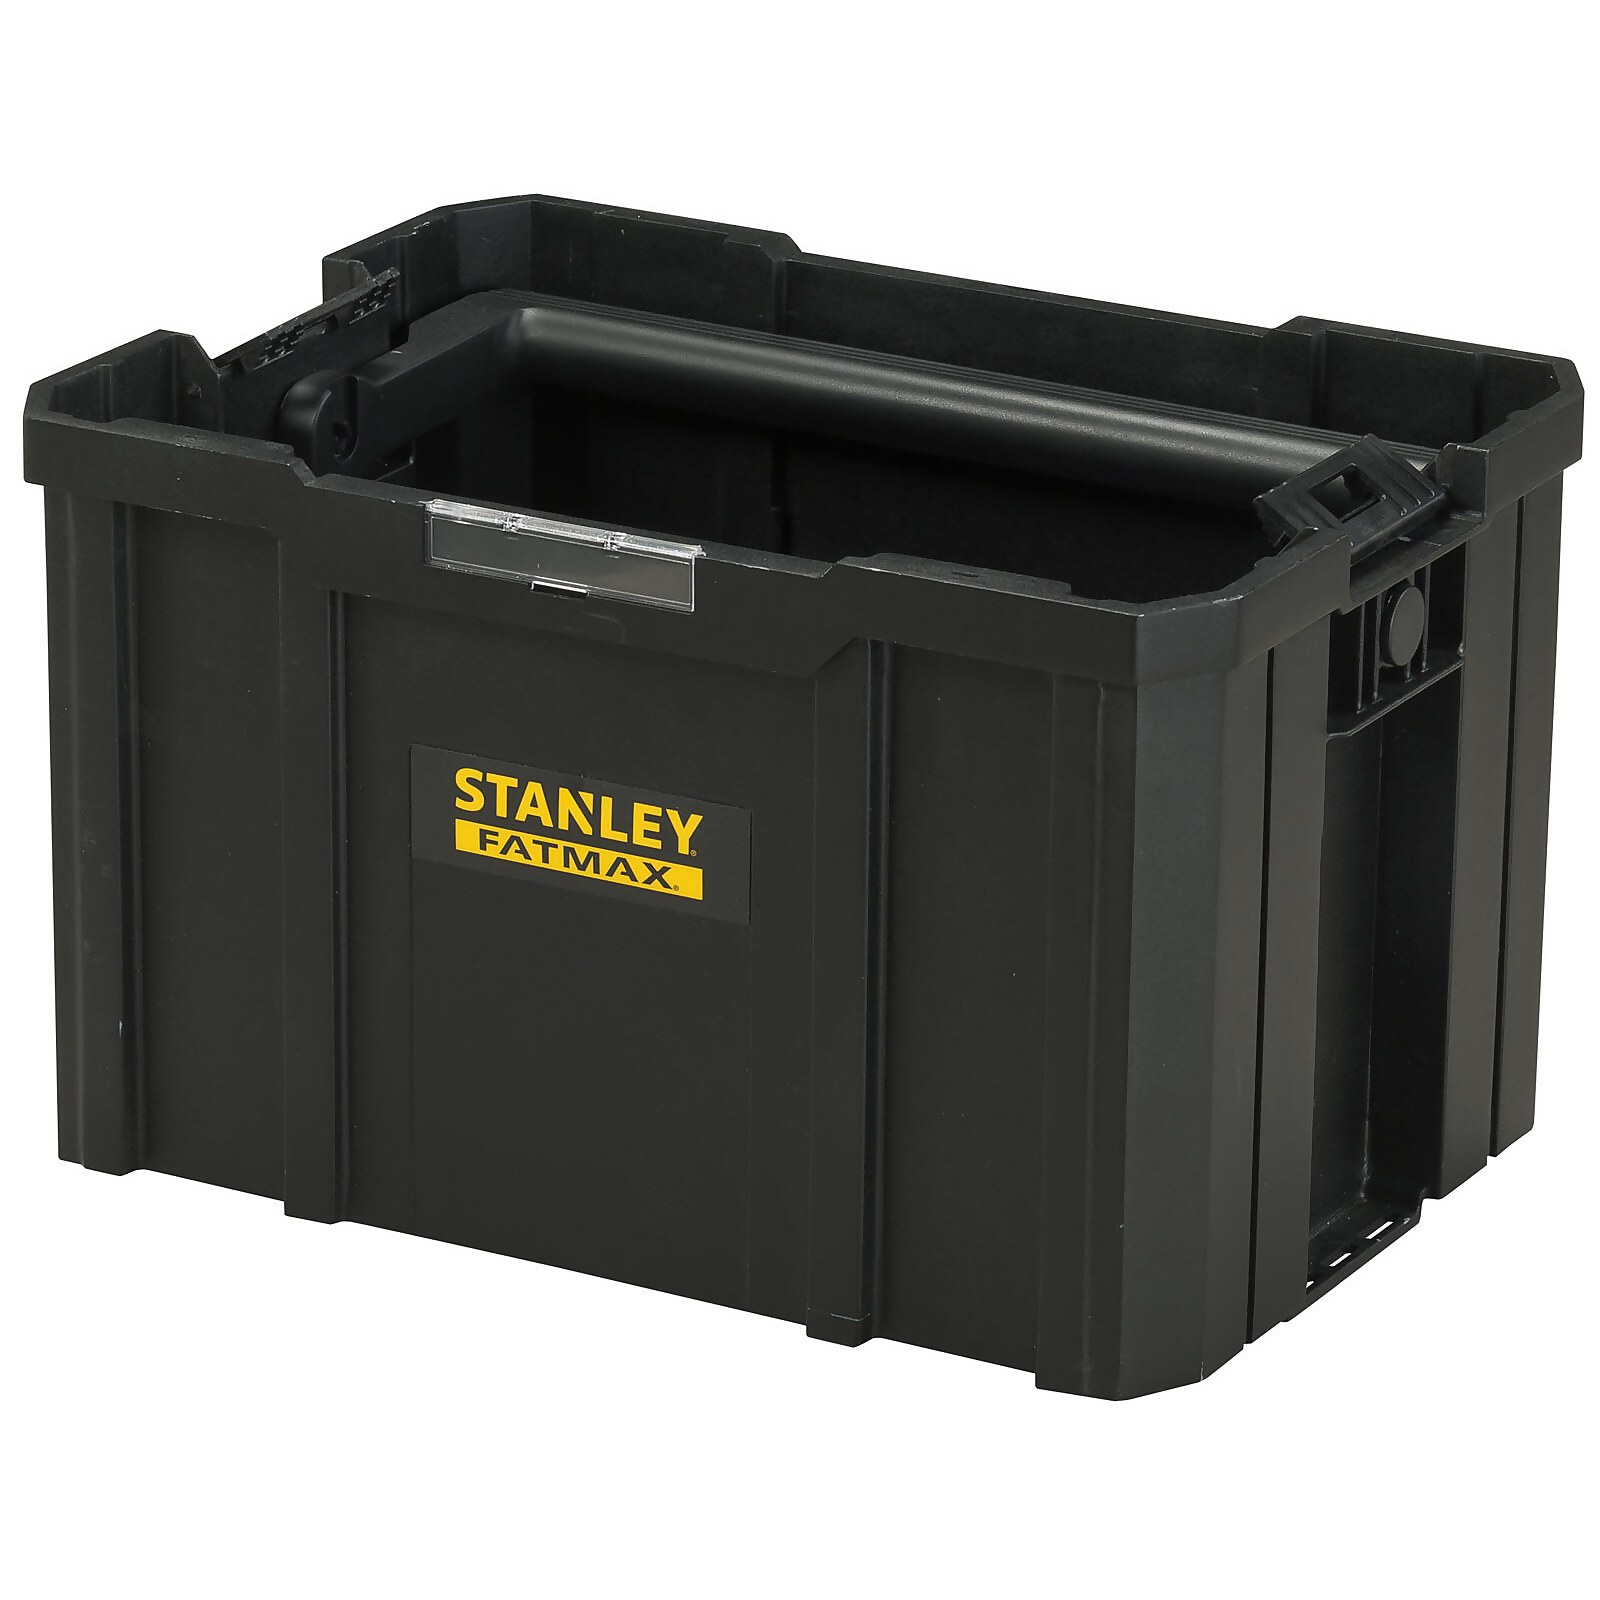 Photo of Stanley Fatmax Pro-stack Tote